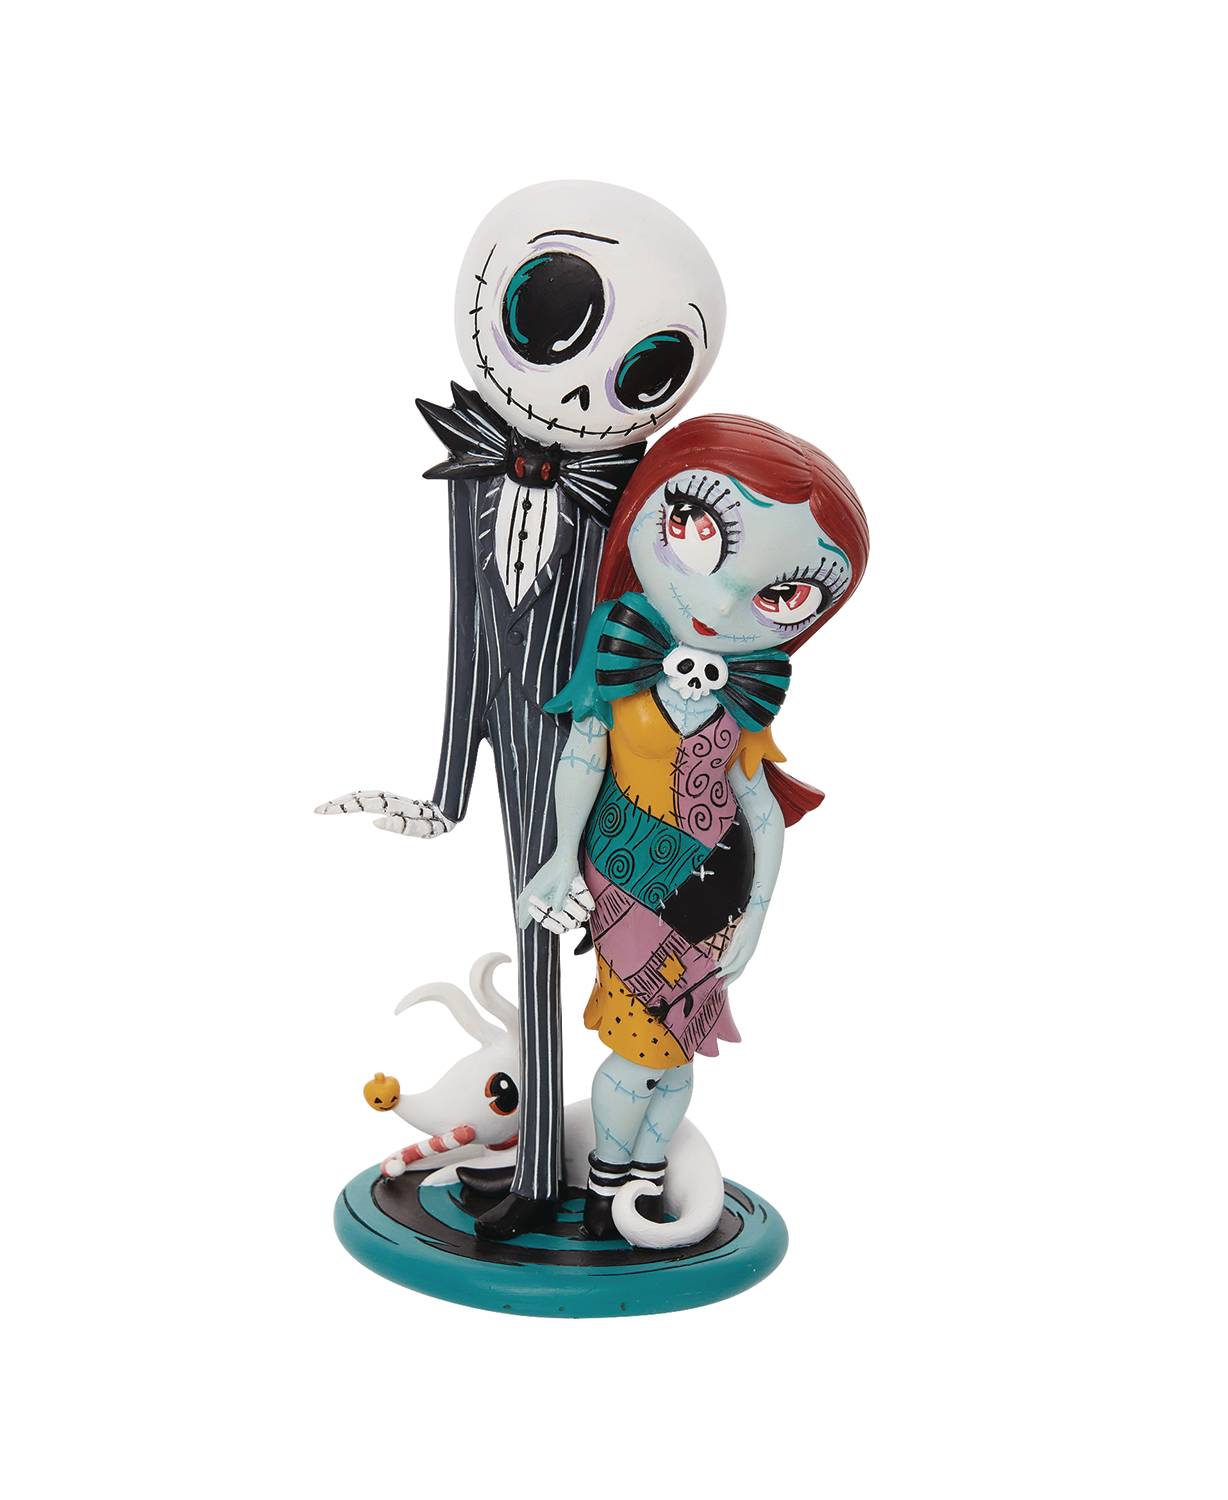 MISS MINDY NBX JACK SALLY AND ZERO 7.68IN FIGURE